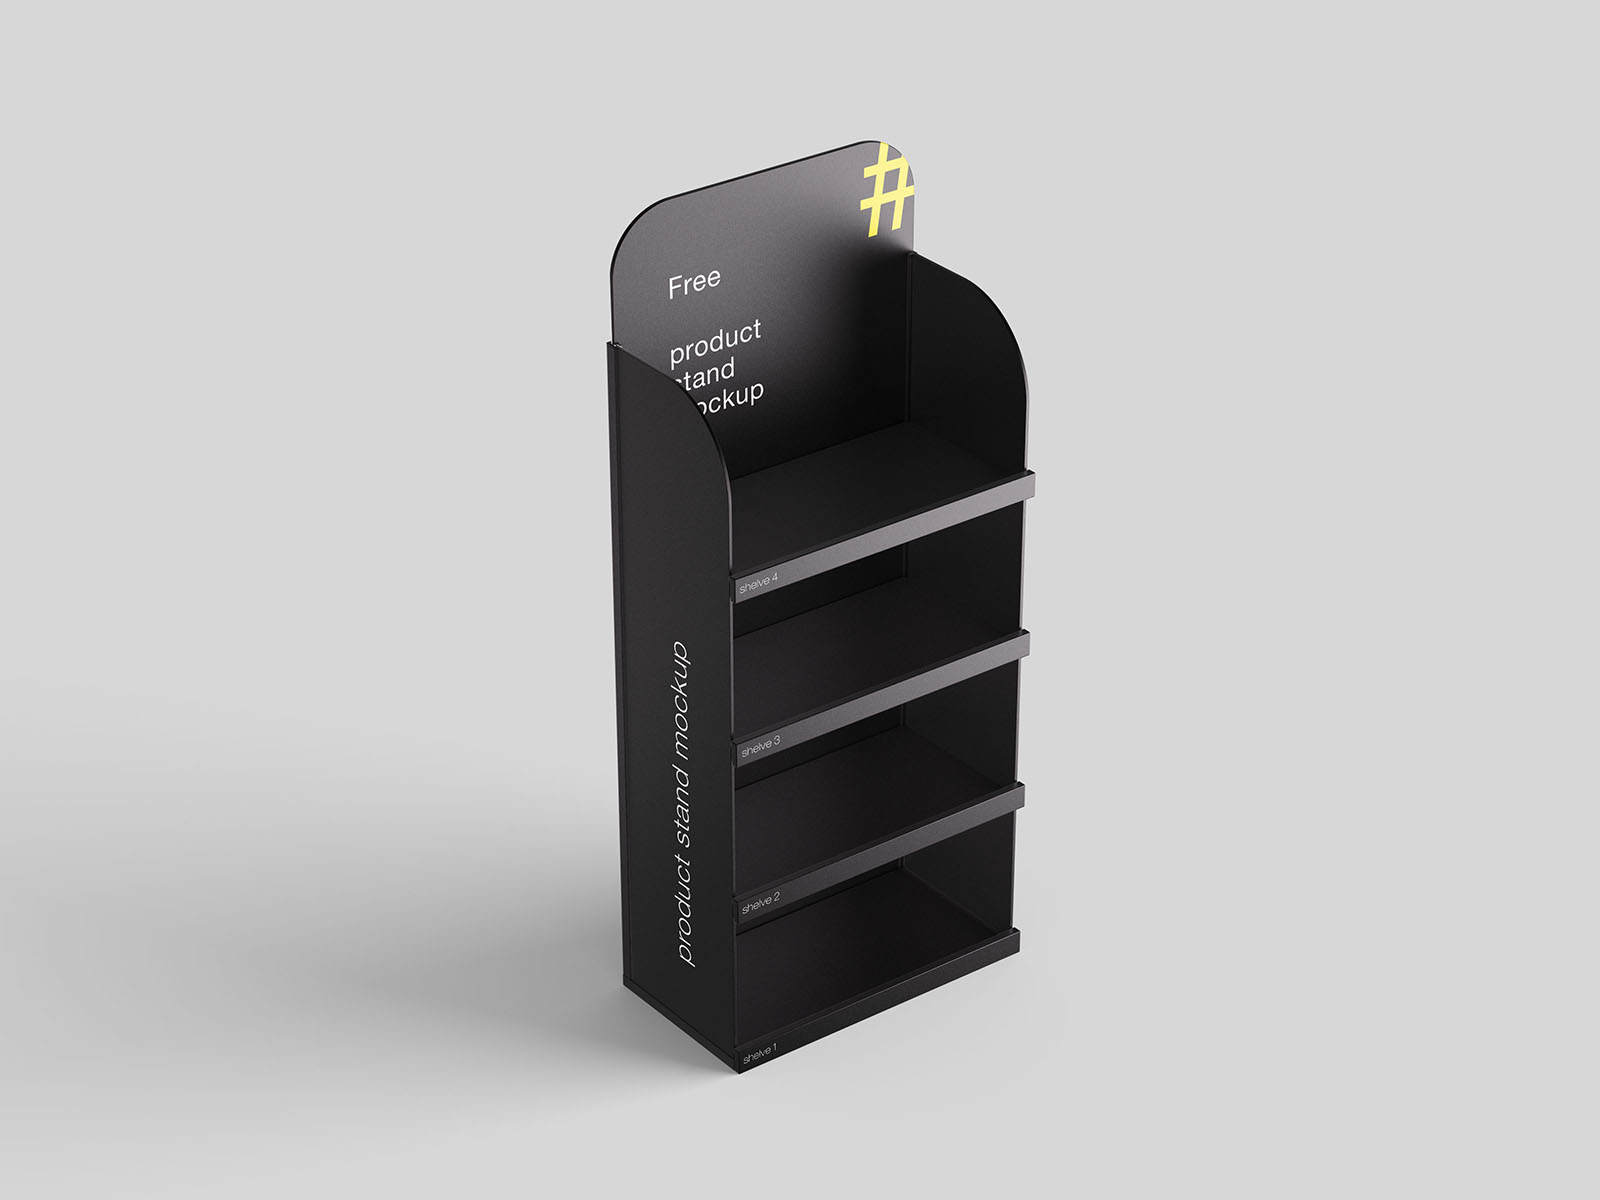 Products stand mockup